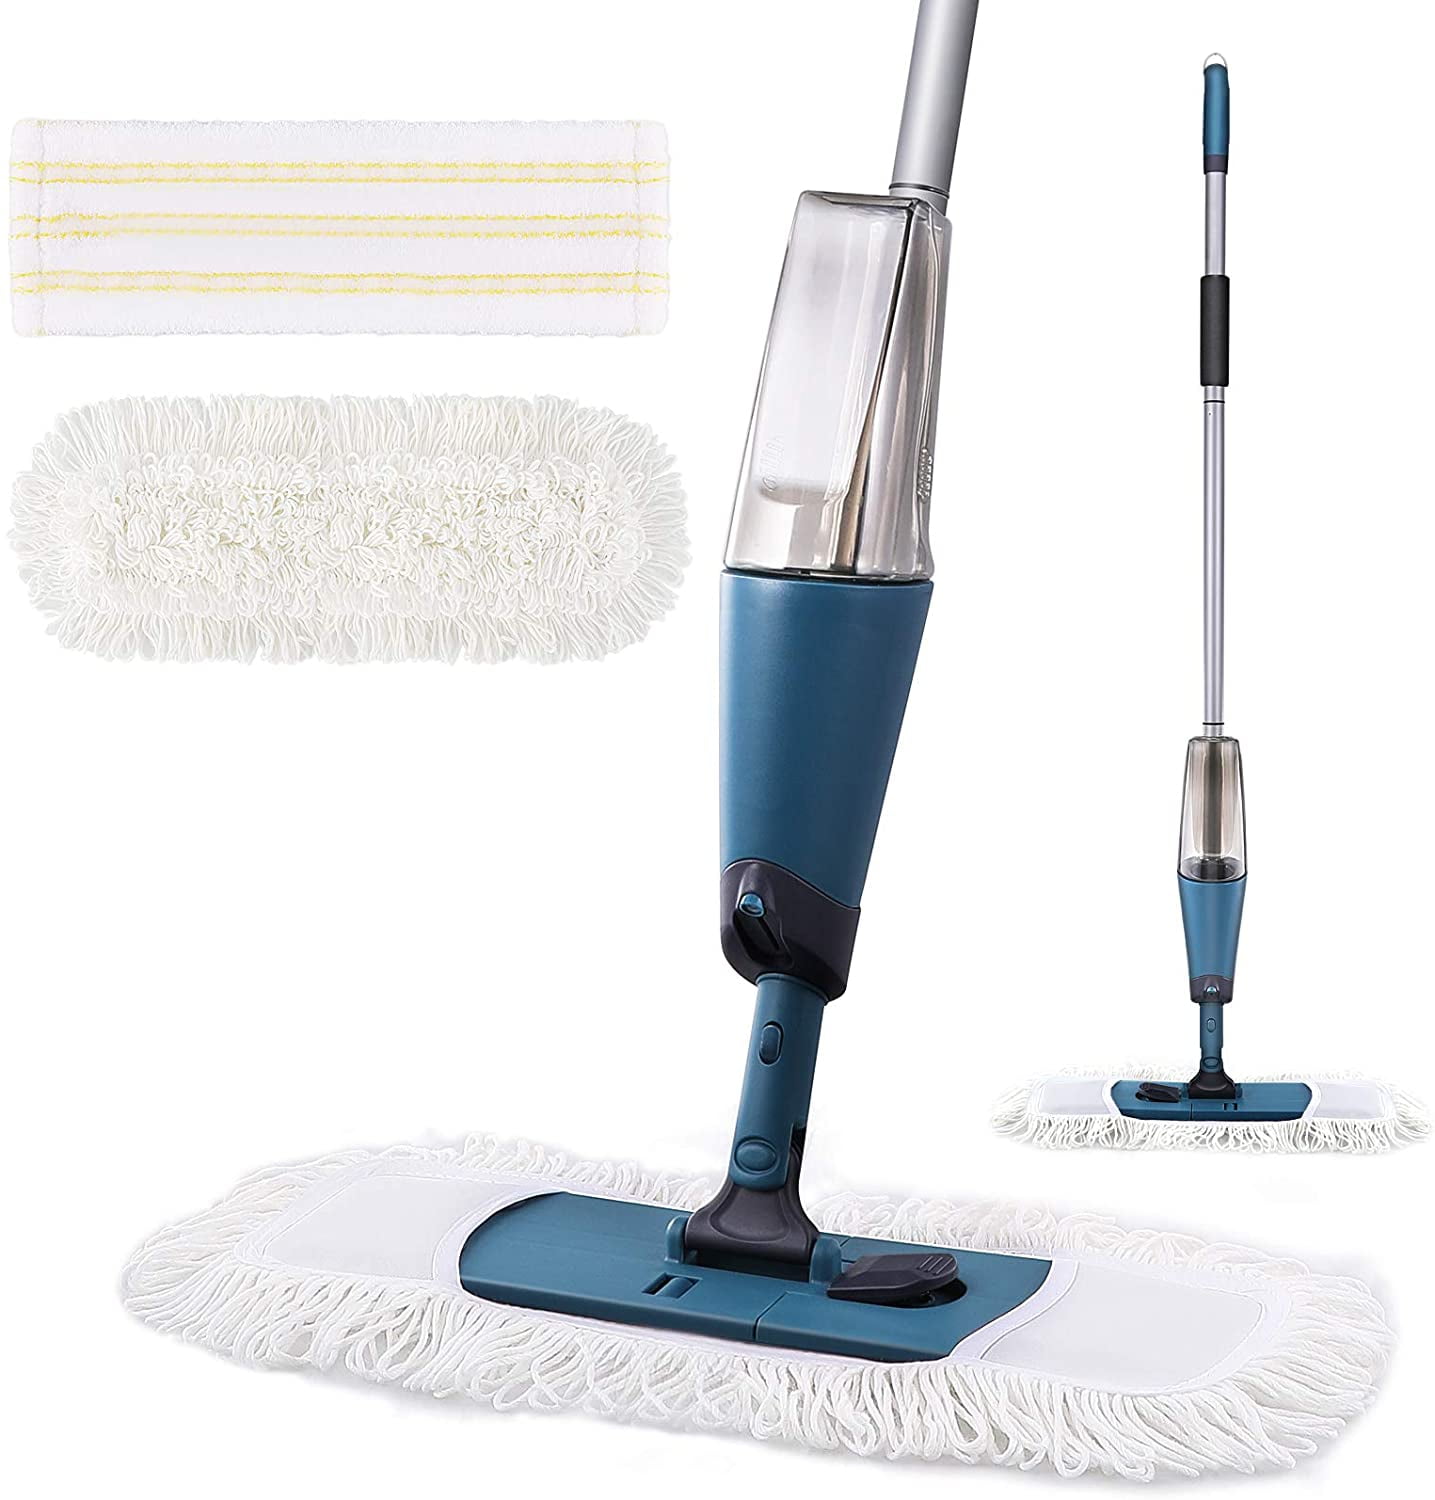 MEXERRIS Microfiber Mop Spray Cleaner for Floors with 2 Pads and Spray Mop 